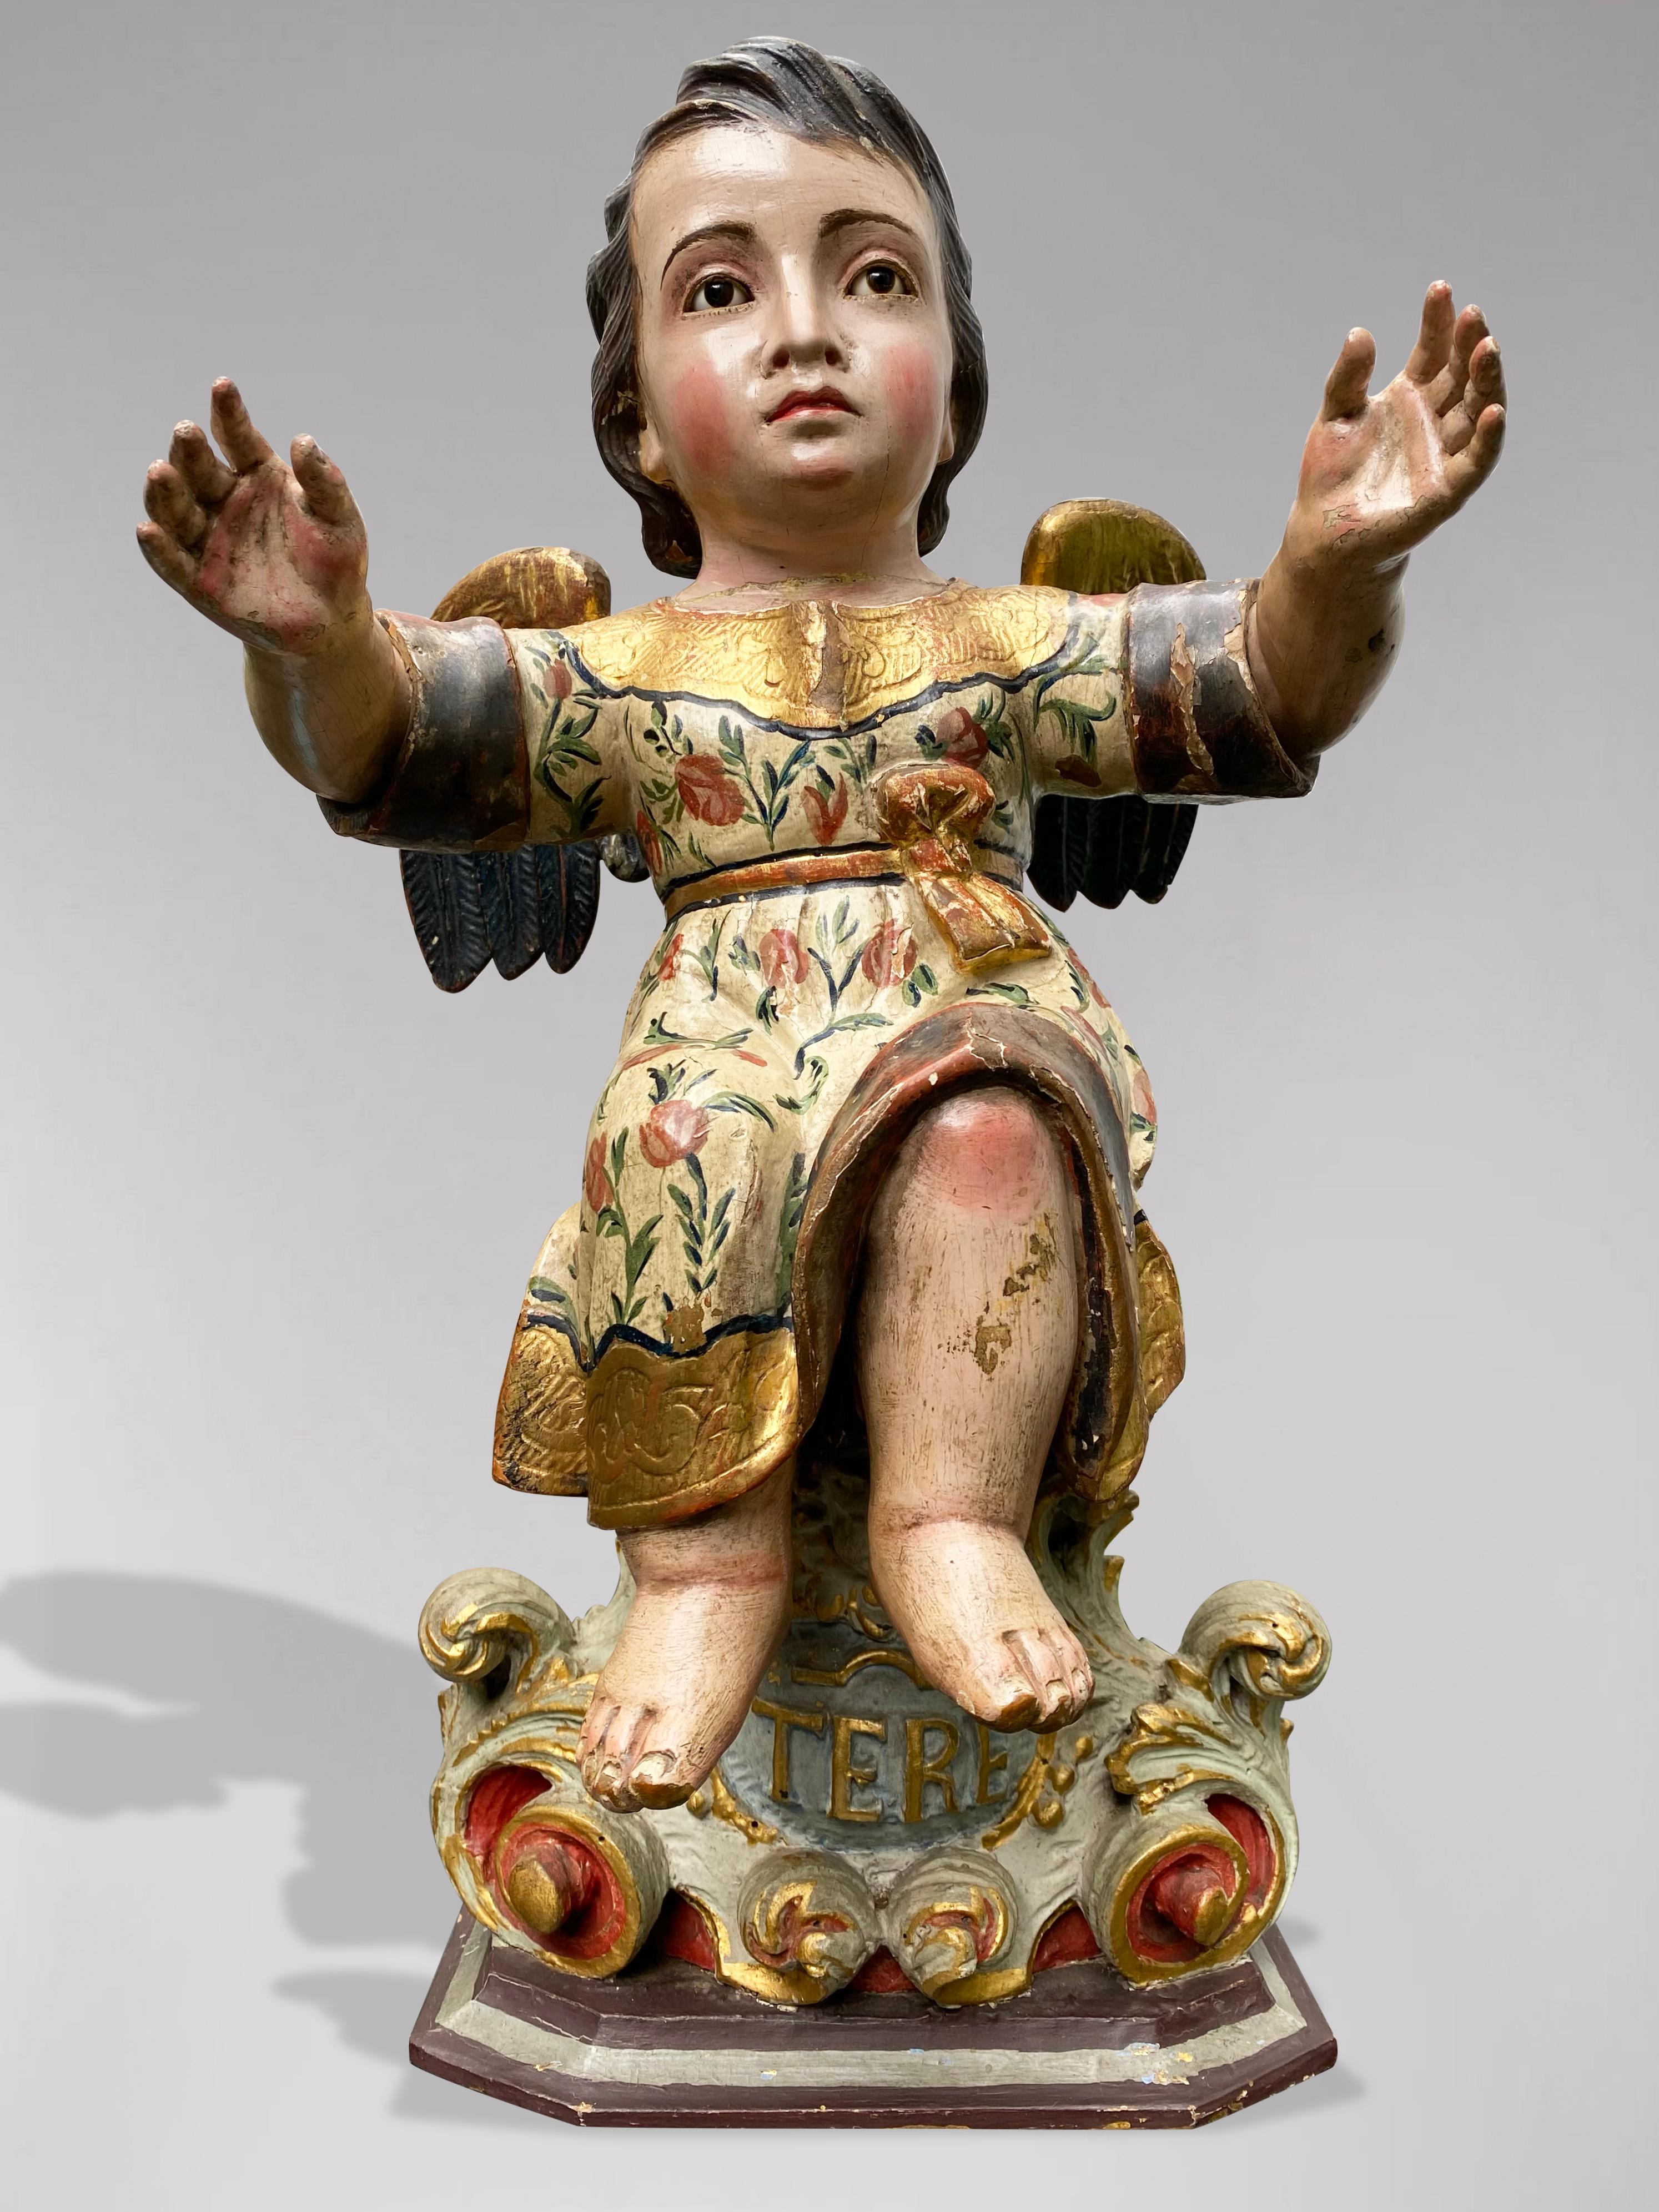 Unknown Figurative Sculpture - A Spanish Statue of a Sitting on a Pedestal Angel with Open Arms, Early 19th C